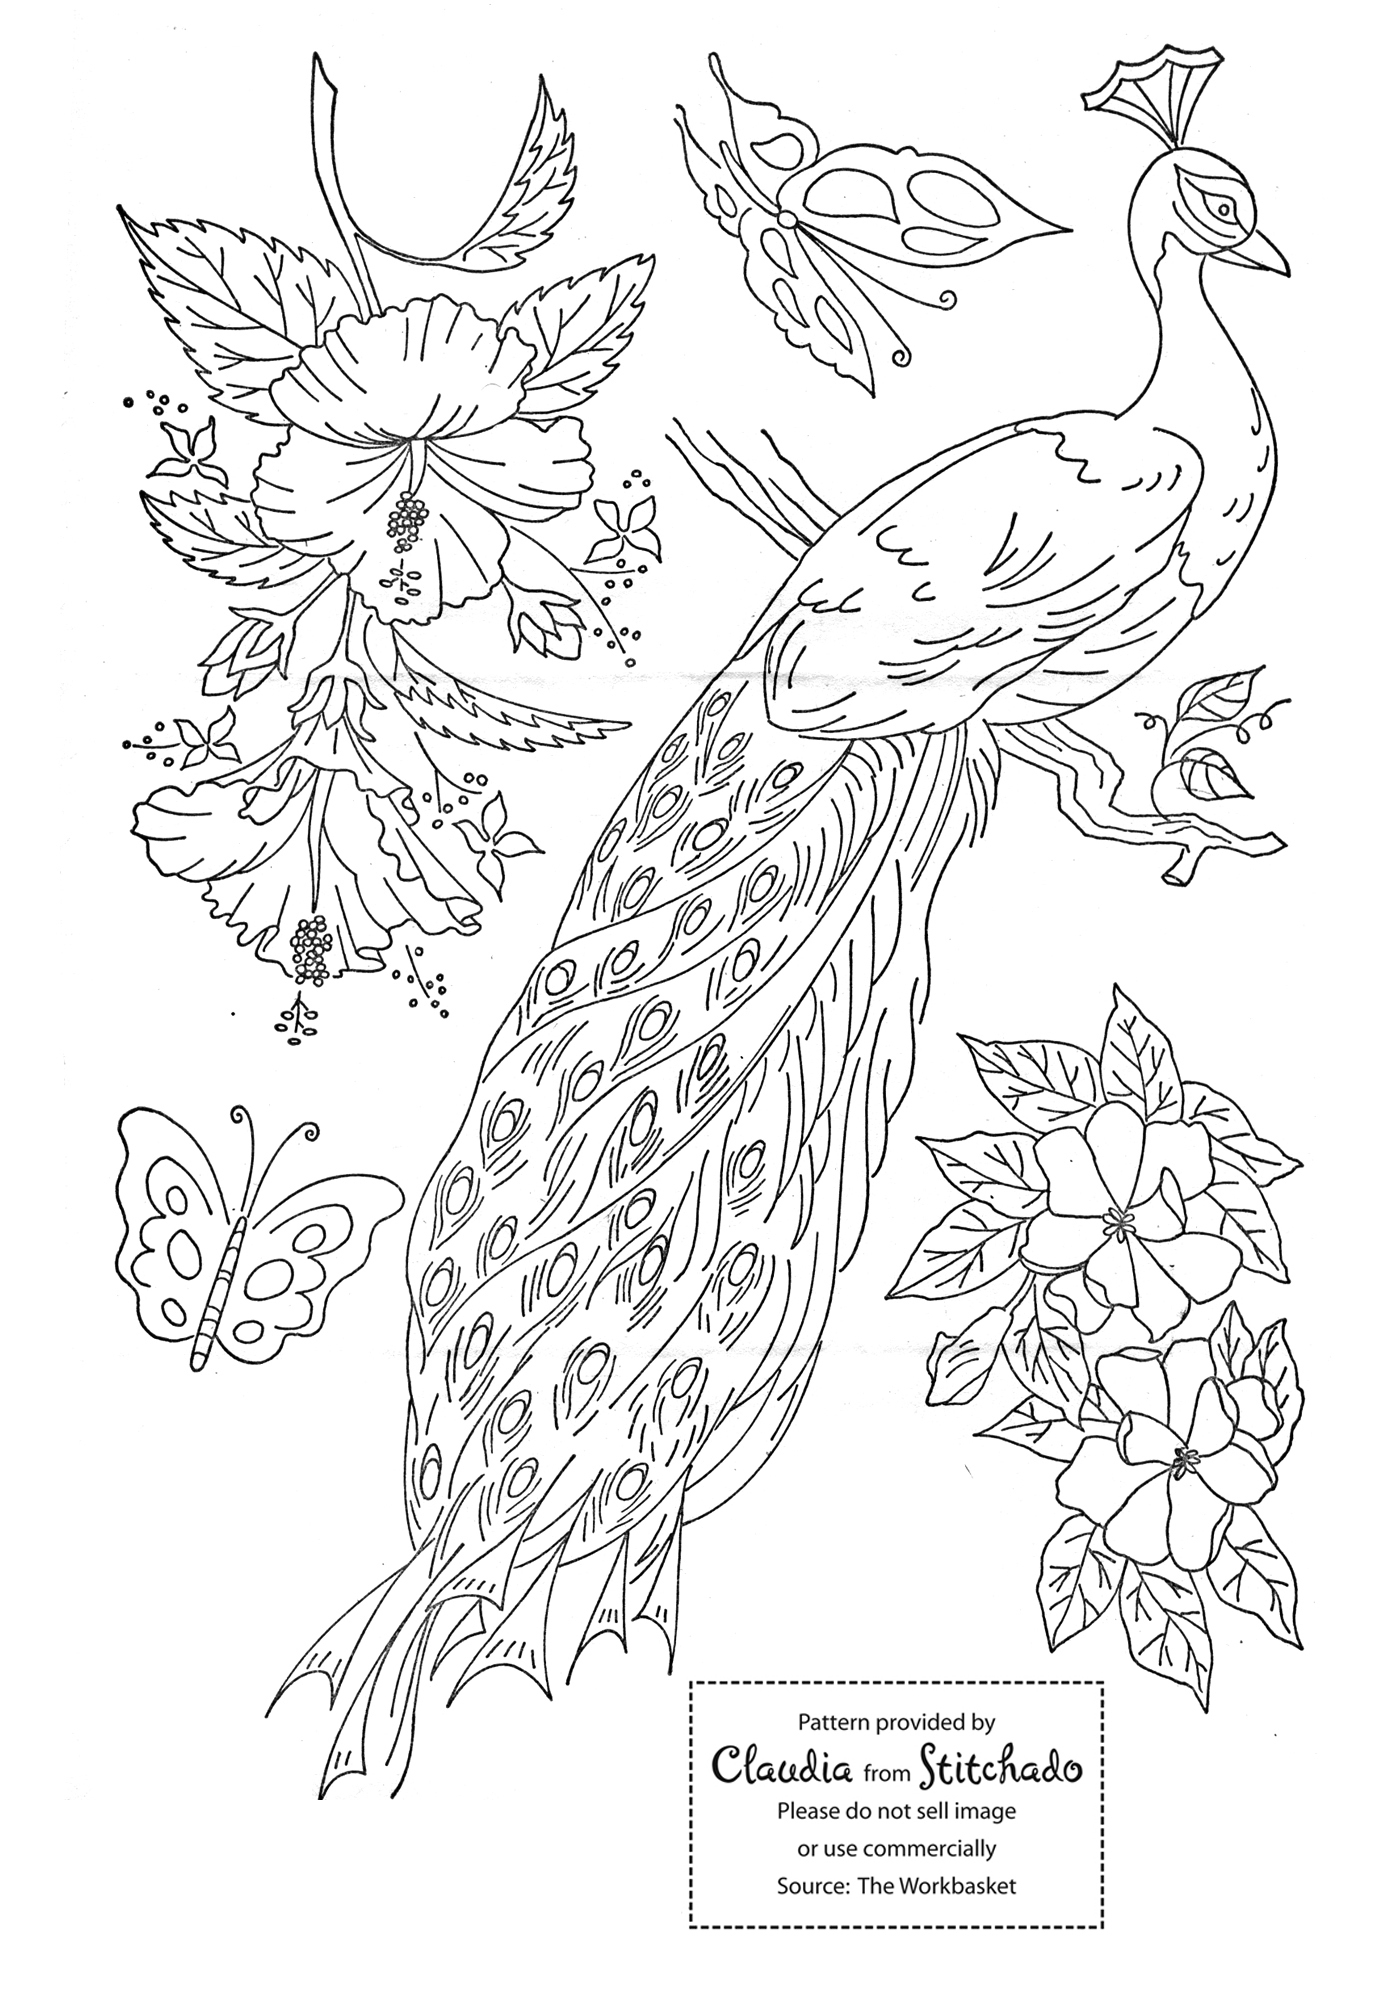 Peacock embroidery design free printable papercraft templates